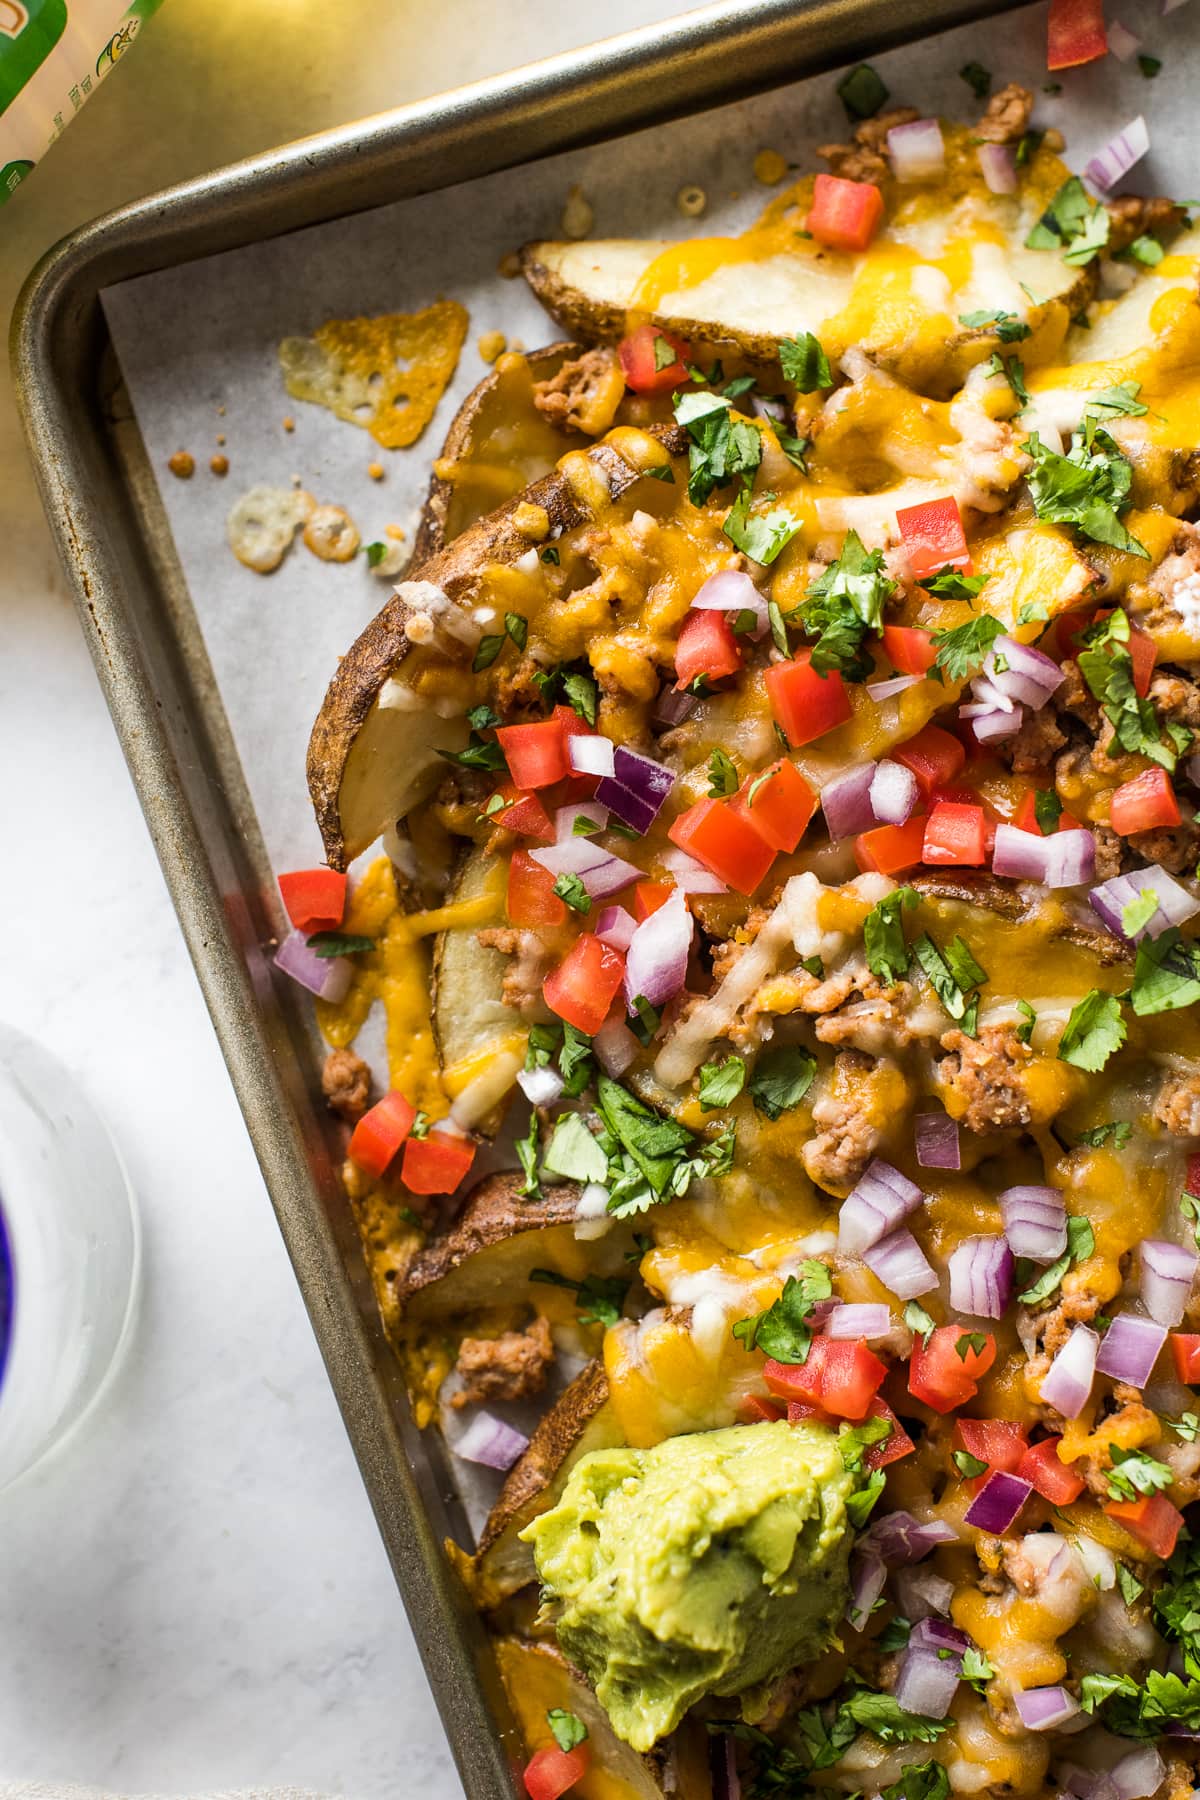 Loaded potato wedges topped with melted cheese, tomatoes, onions, cilantro, and guacamole.